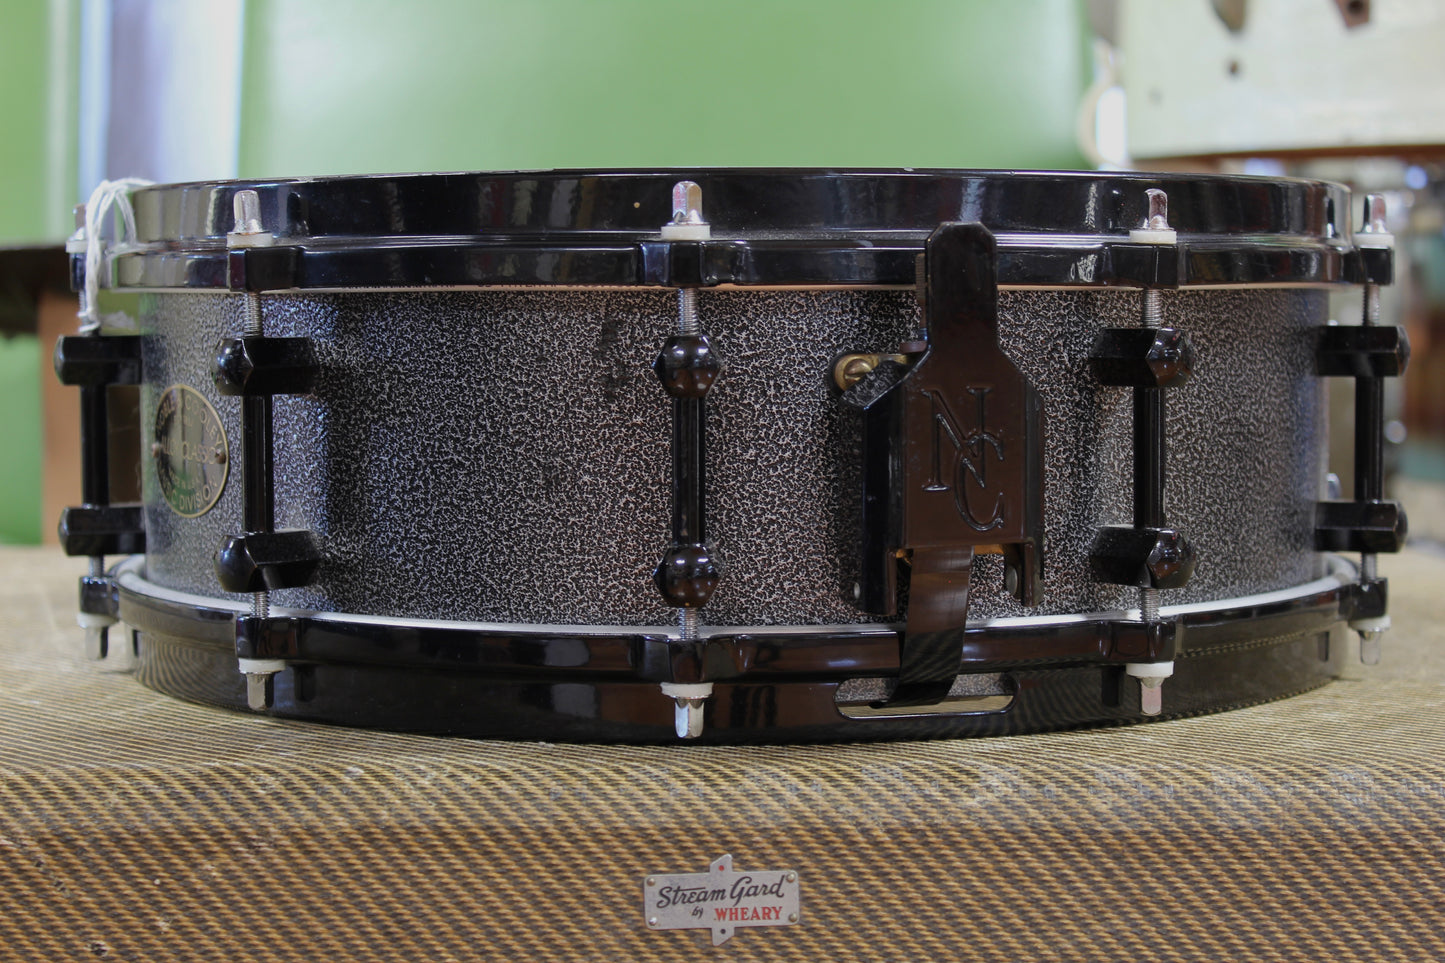 Noble & Cooley Alloy Classic 4.75x14 Texture Coated